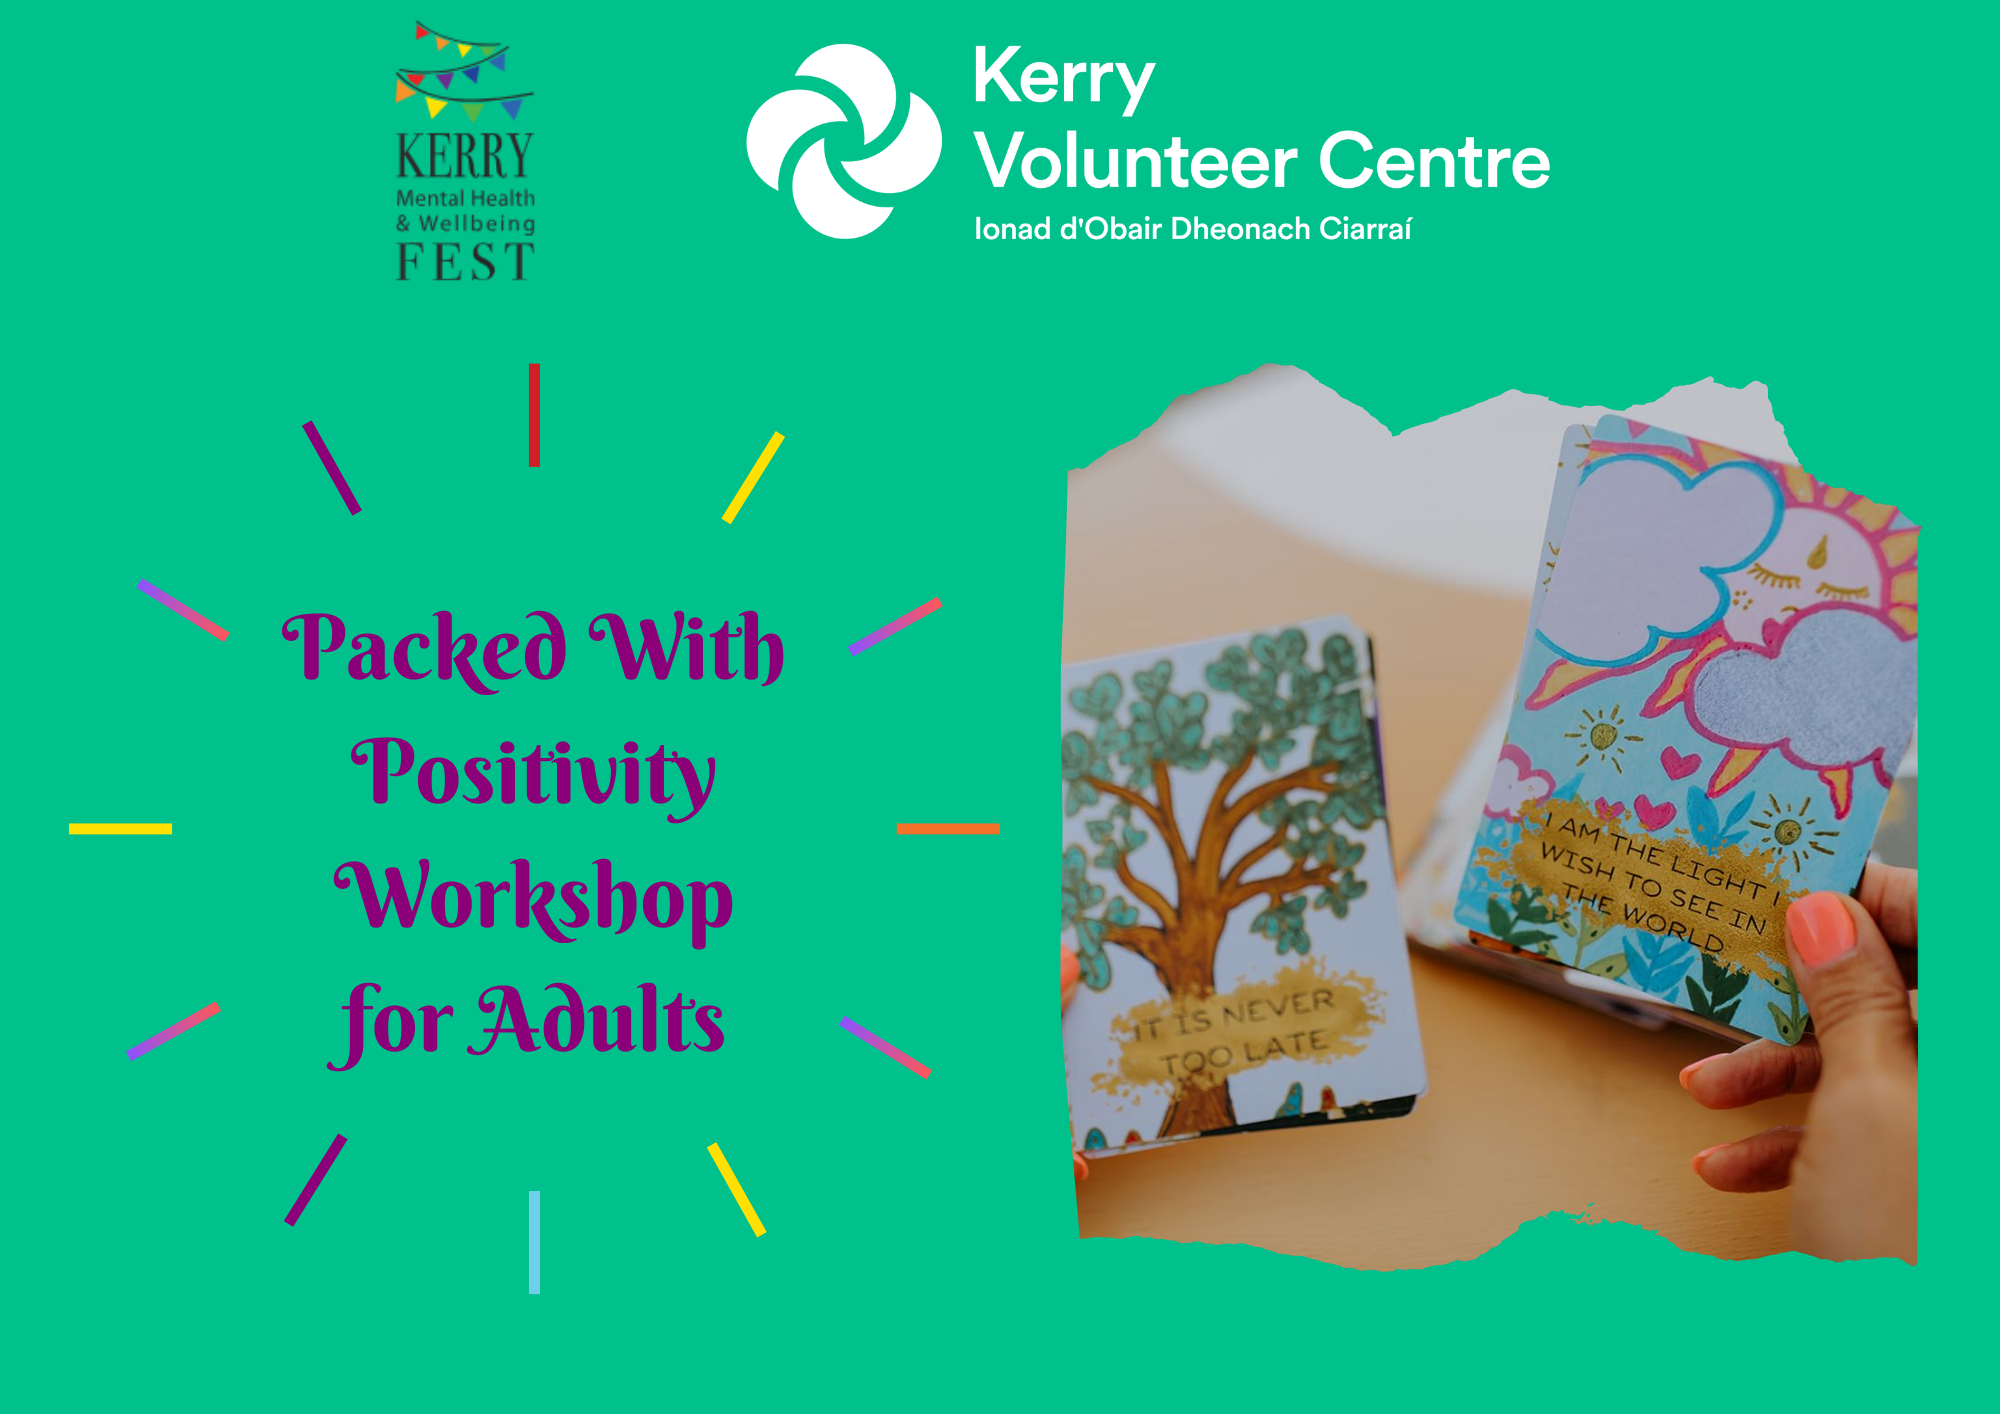 Packed With Positivity-Adult Workshop event at Kerry Mental Health & Wellbeing Fest 2022